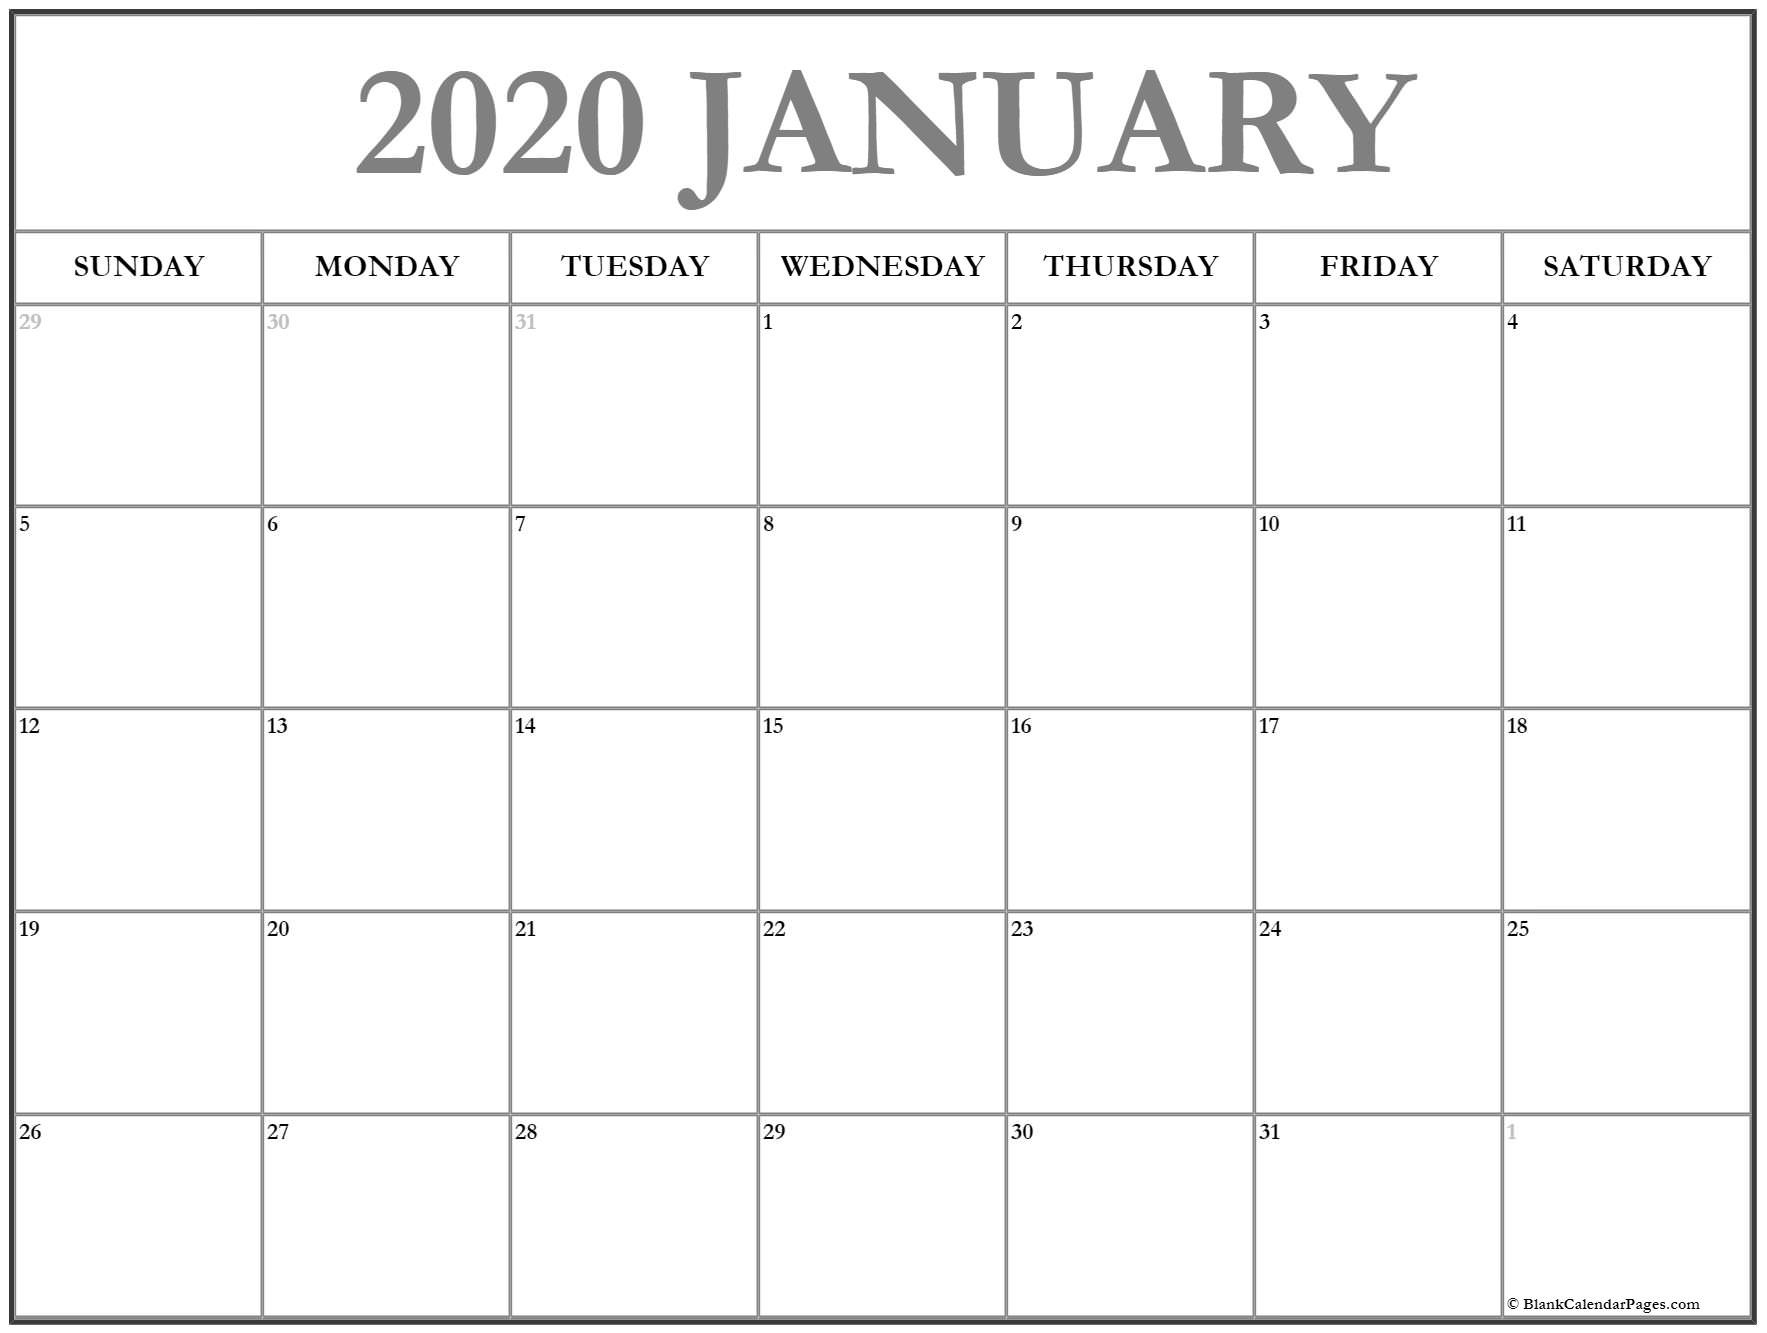 January 2020 Calendar | Free Printable Monthly Calendars-January 2020 Calendar With Moon Phases